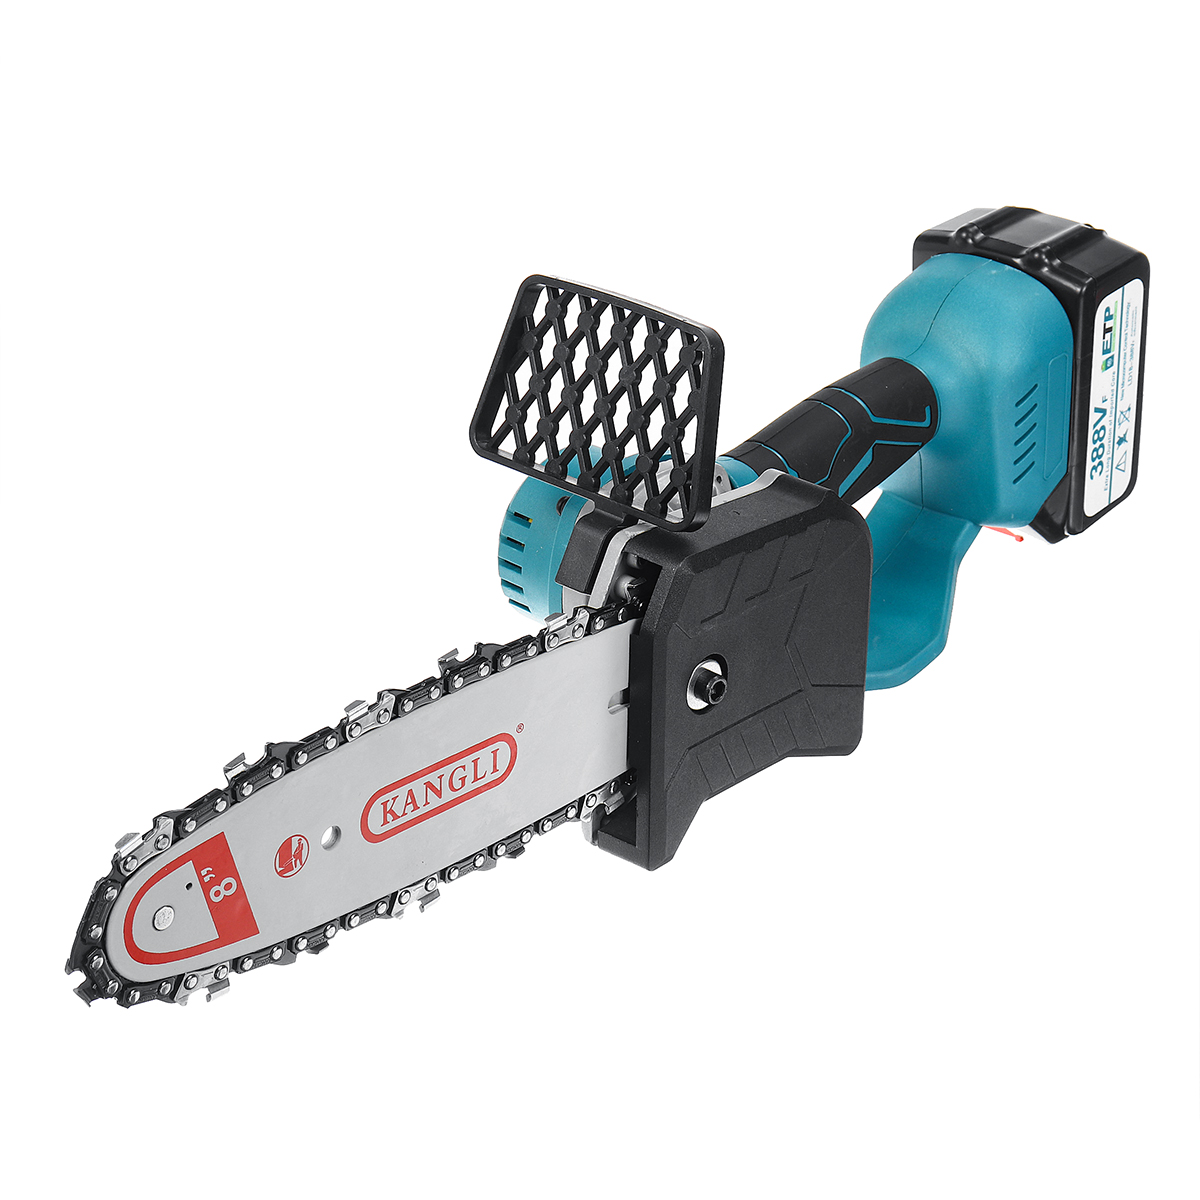 1500W-8inch-Cordless-Electric-Chain-Saw-Brushless-Motor-Power-Tools-Rechargeable-Lithium-Battery-1805588-9